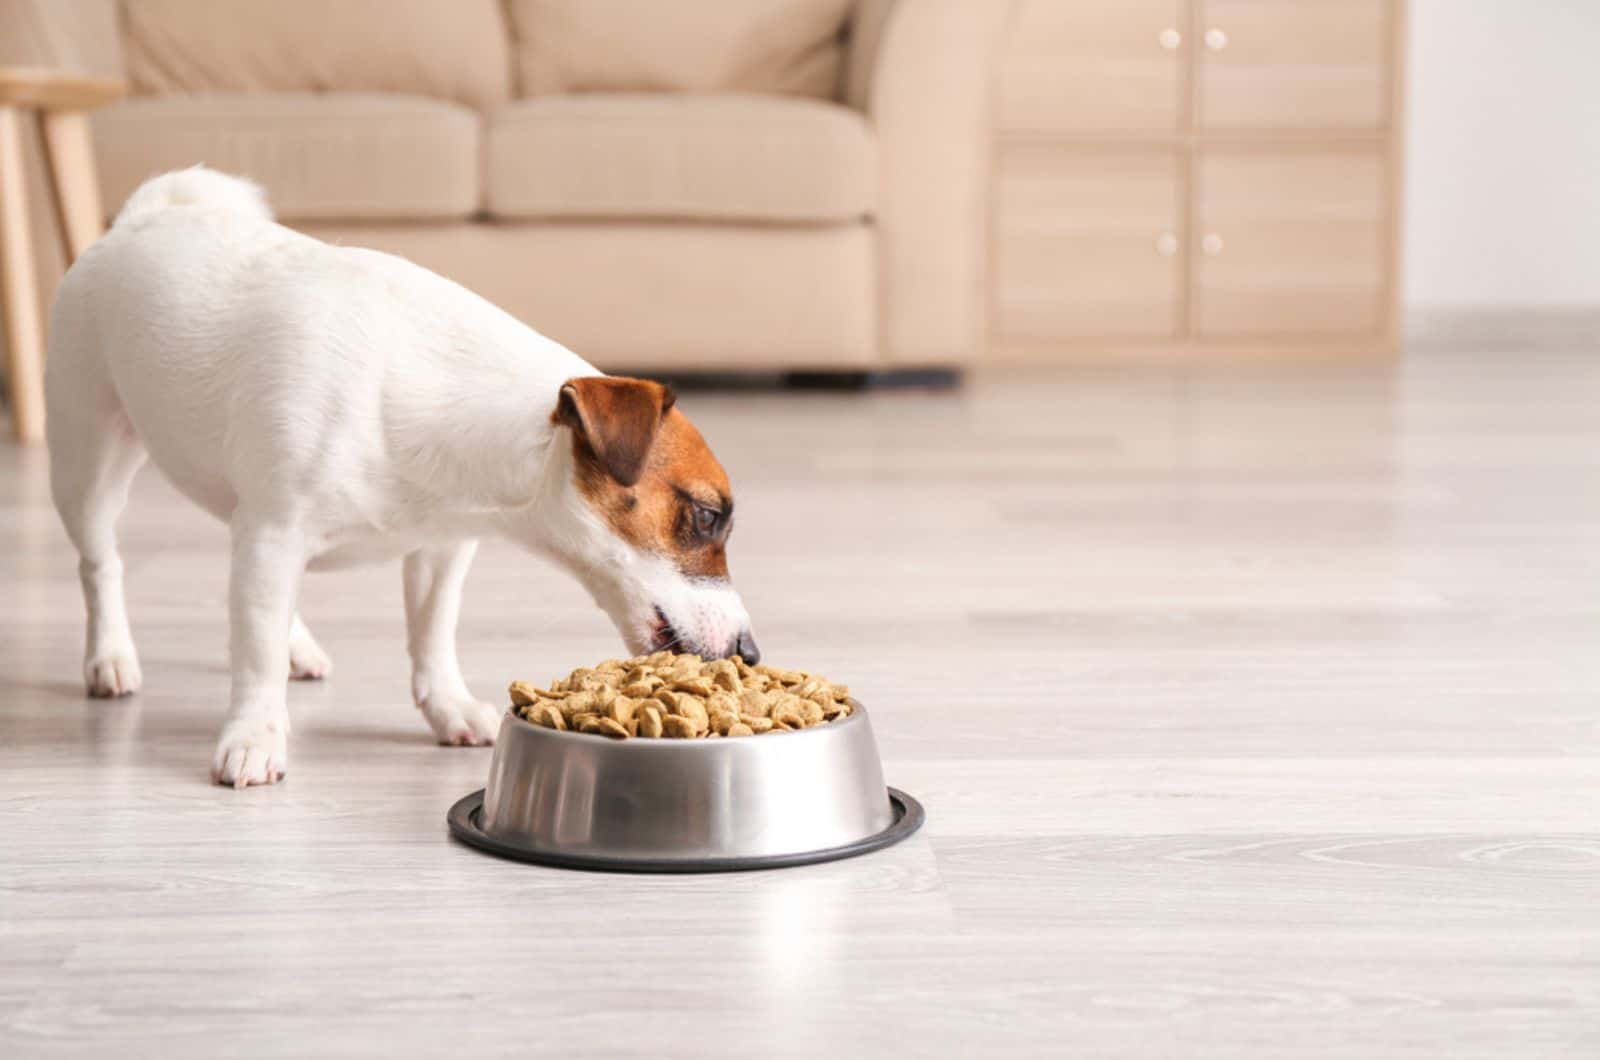 jack russell terrier eating from a bowl